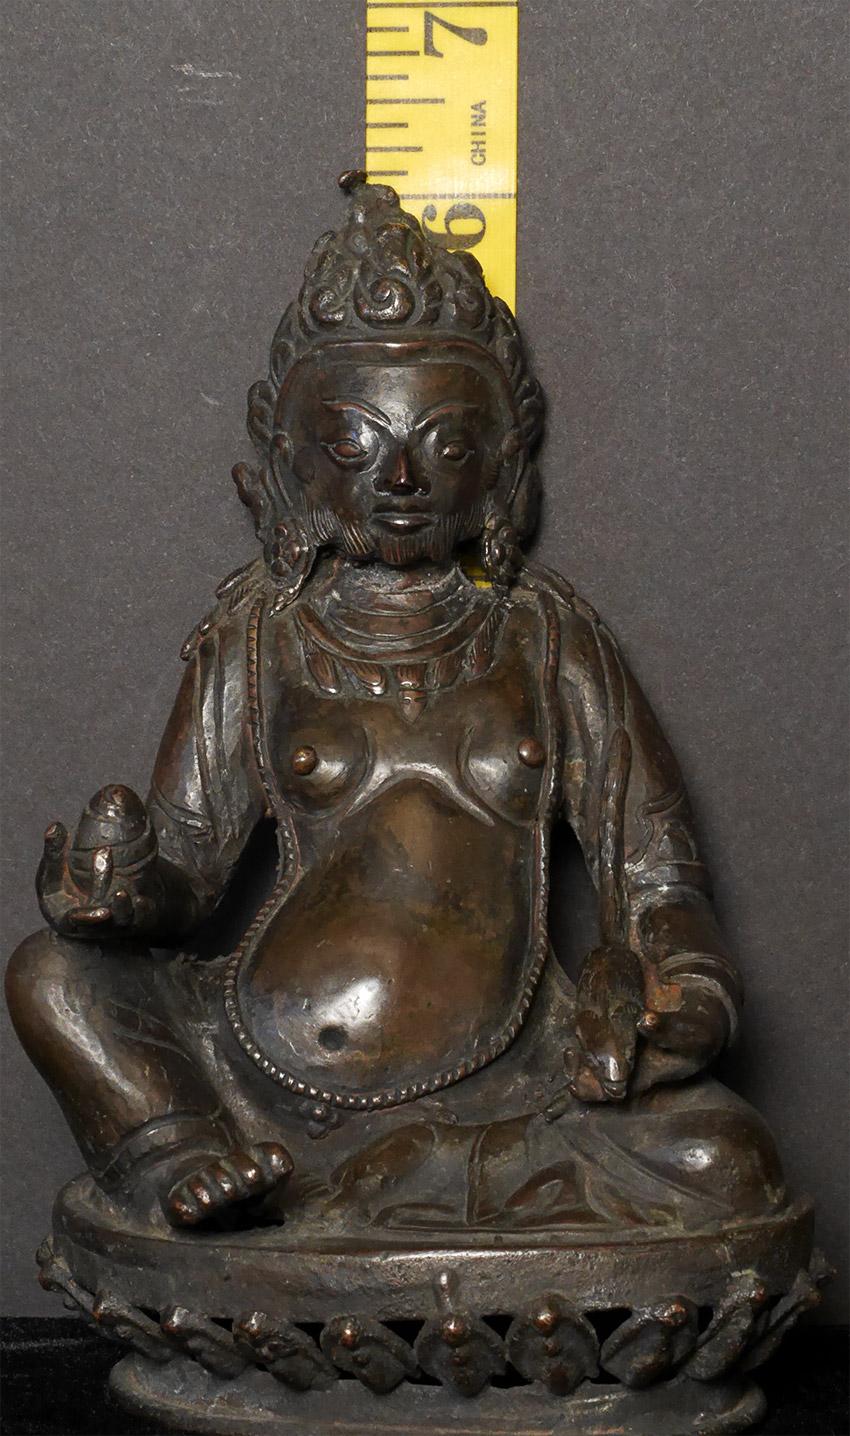 This is a delightful sculpture of Jambahala. It is from Nepal, early 20th century. You see numerous Ron's Buddhas and bodhisattvas and Tara statues from this period. Jambahala however, is rarely sculpted in Nepal. virtually all of the sculptures